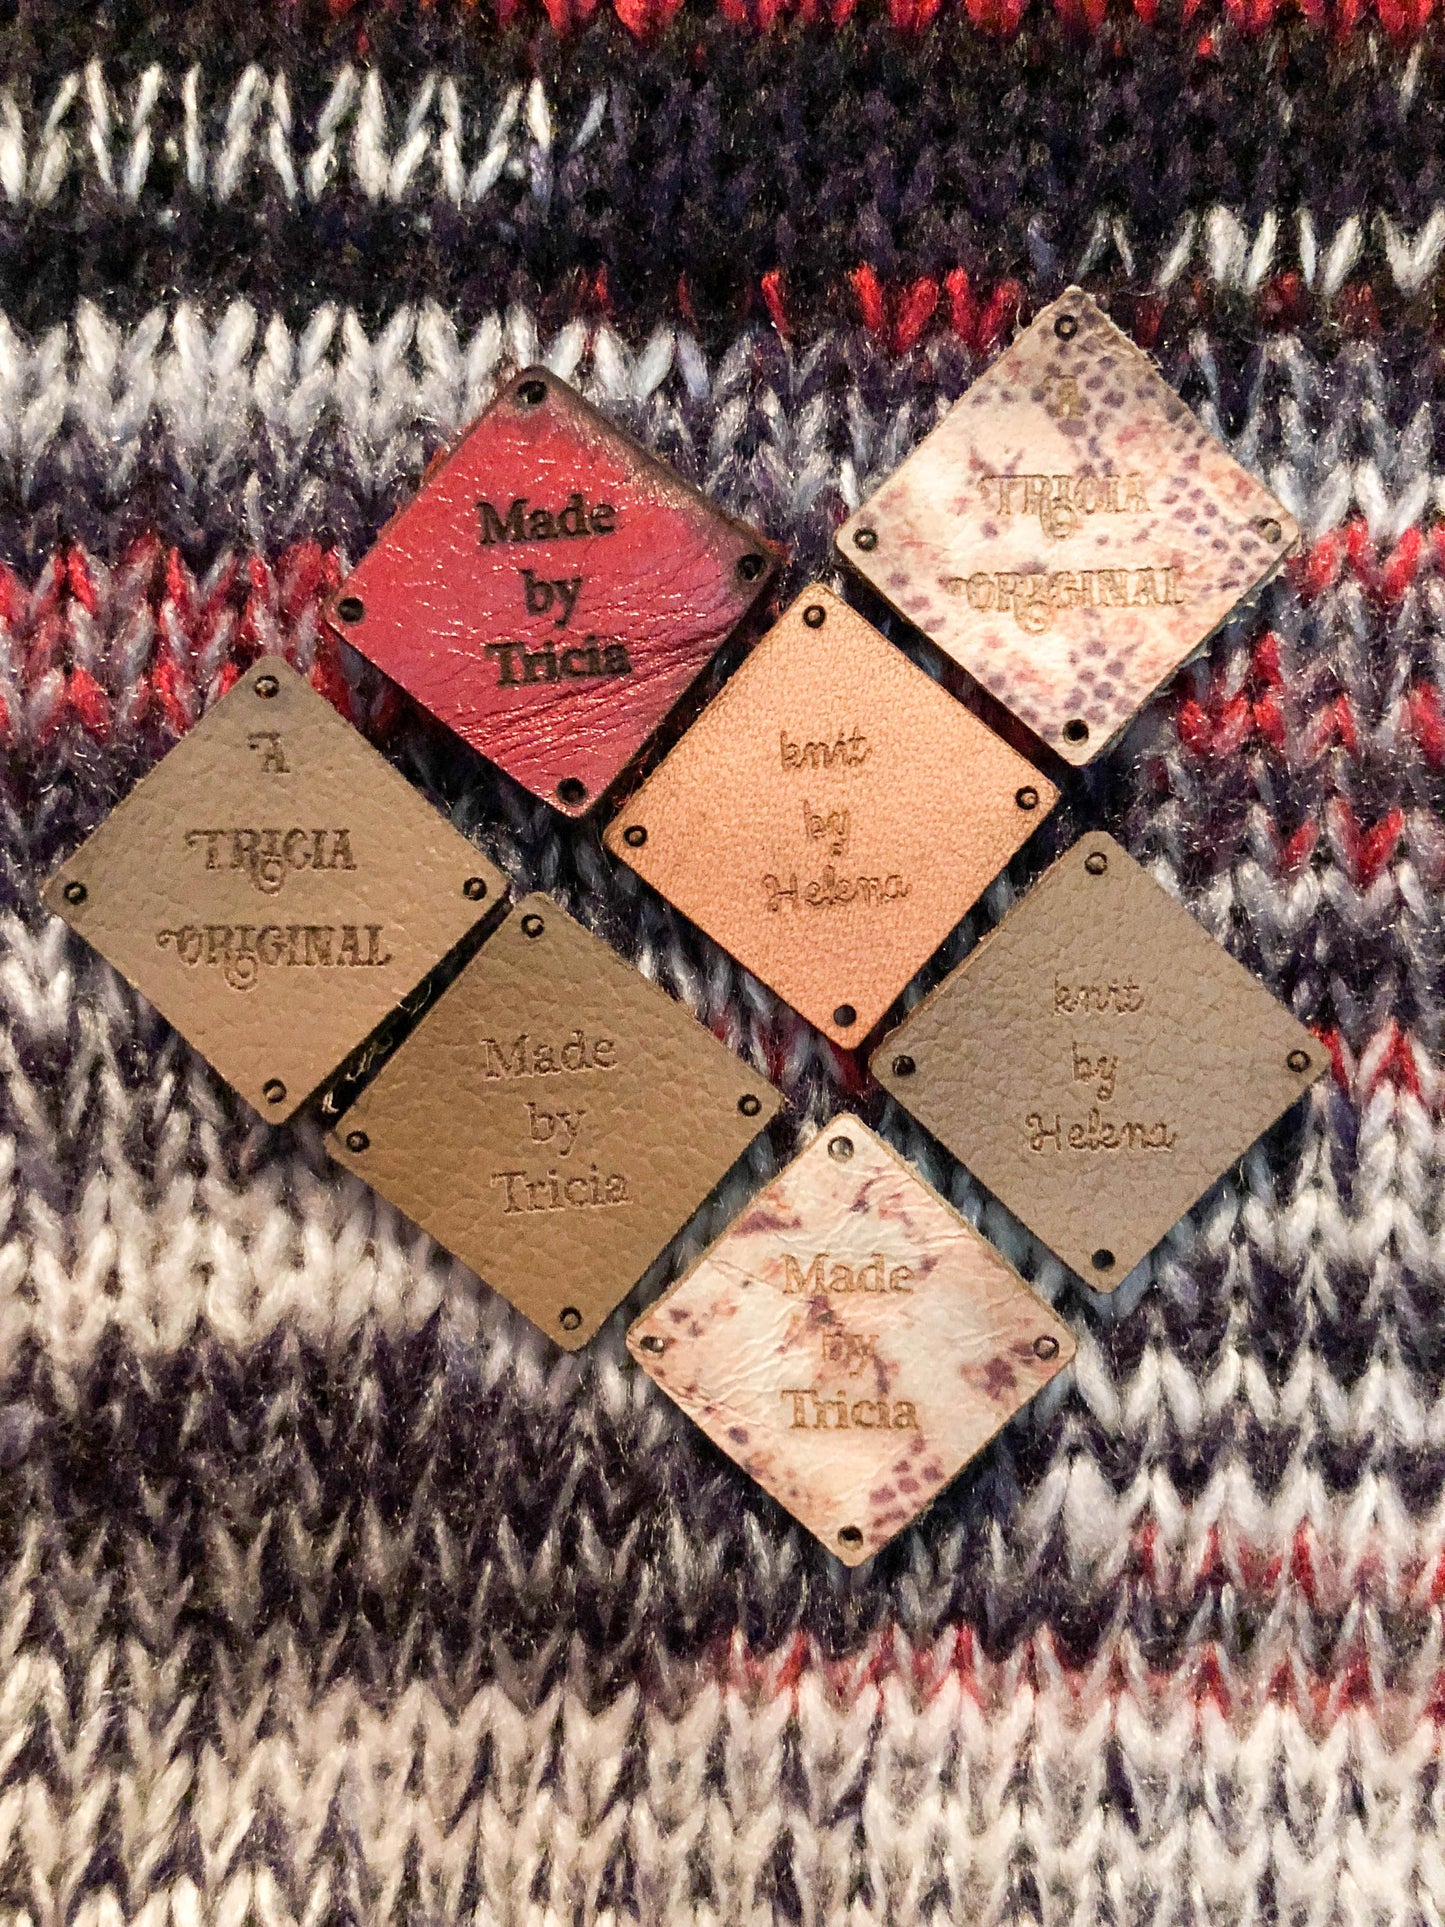 Knitting Tags - Hem Tags - Crochet Tags - Sewing Tags - Leather tags - Garment Tags - Product Tags - Knitting Labels - Set of 25 - Diamonds